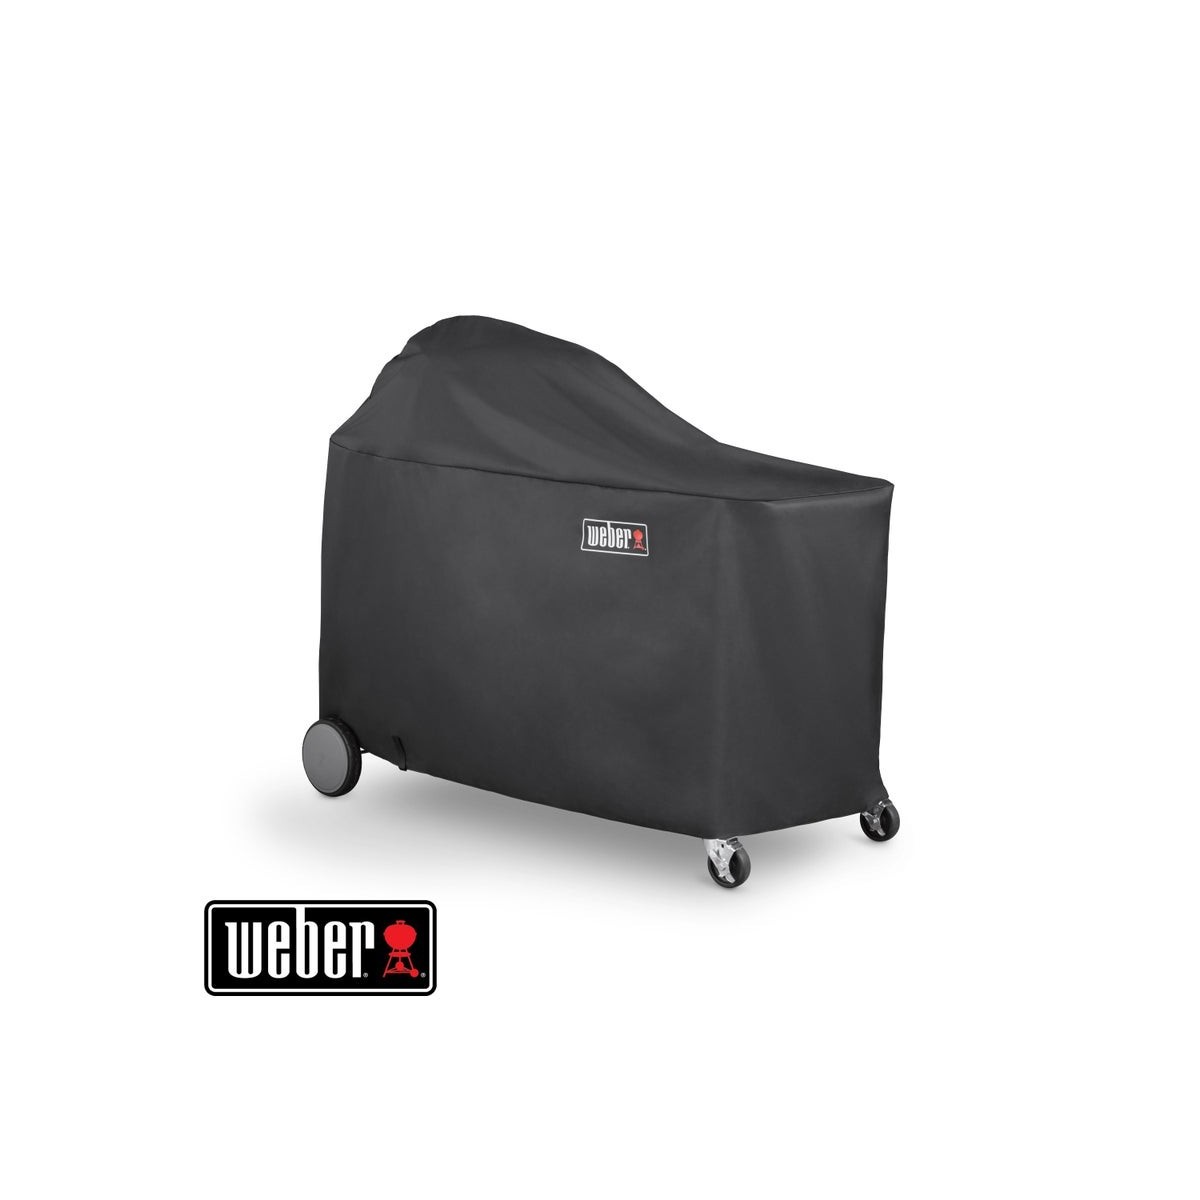 WEBER Premium Barbecue Cover - Fits Summit® Kamado Grilling Centre, 7174